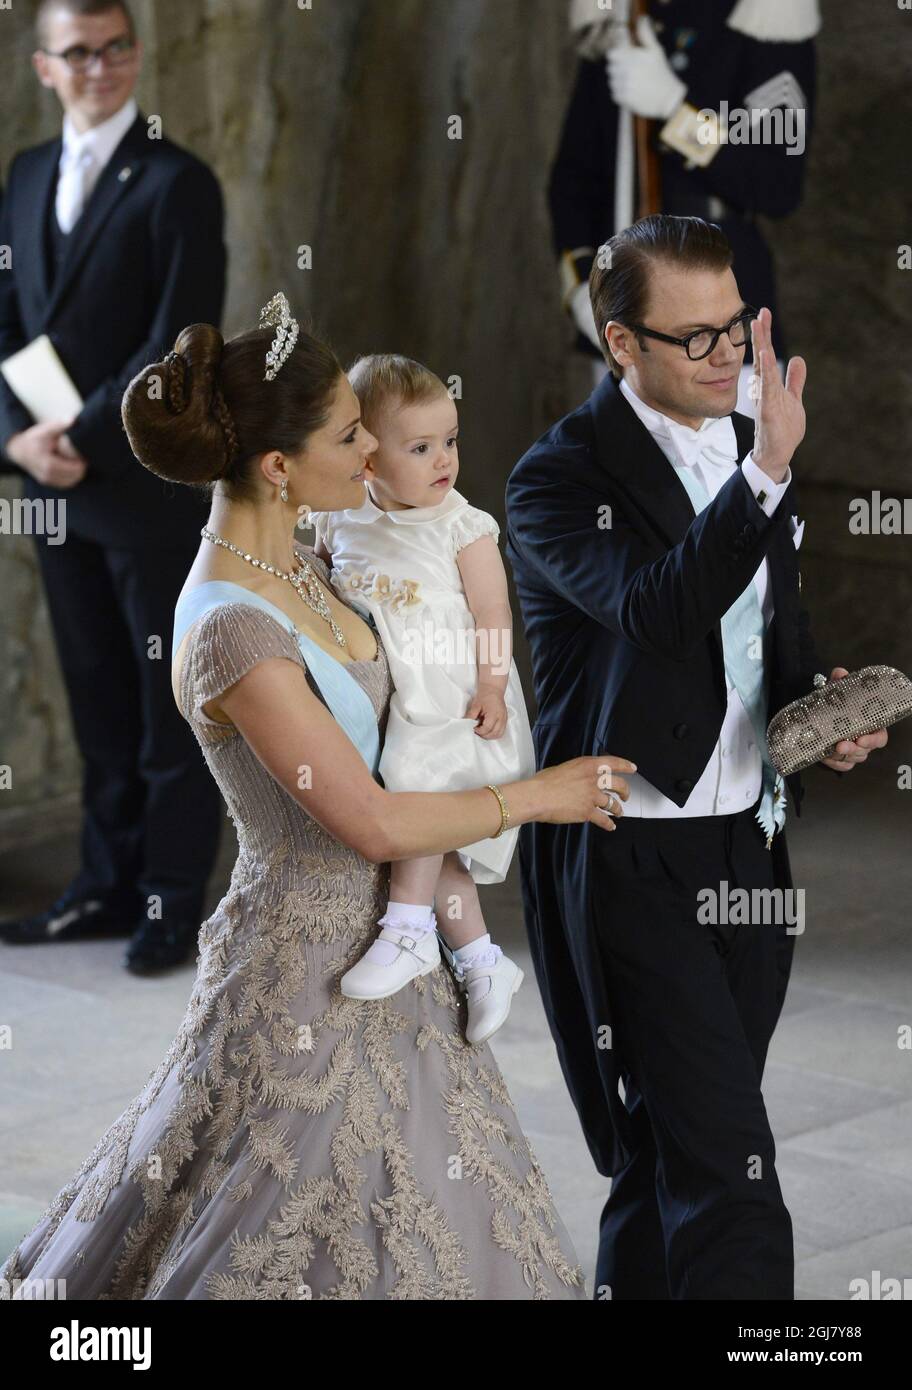 STOCKHOLM 20130608 Crown Princess Victoria, Prince Daniel and Princess Estelle arrive for the wedding of Princess Madeleine of Sweden and Mr Christopher OÂ’Neill held at the Royal Chapel at the Royal Palace of Stockholm on Saturday June 8, 2013. Foto: Tobias Rostlund / SCANPIX / kod 1014  Stock Photo